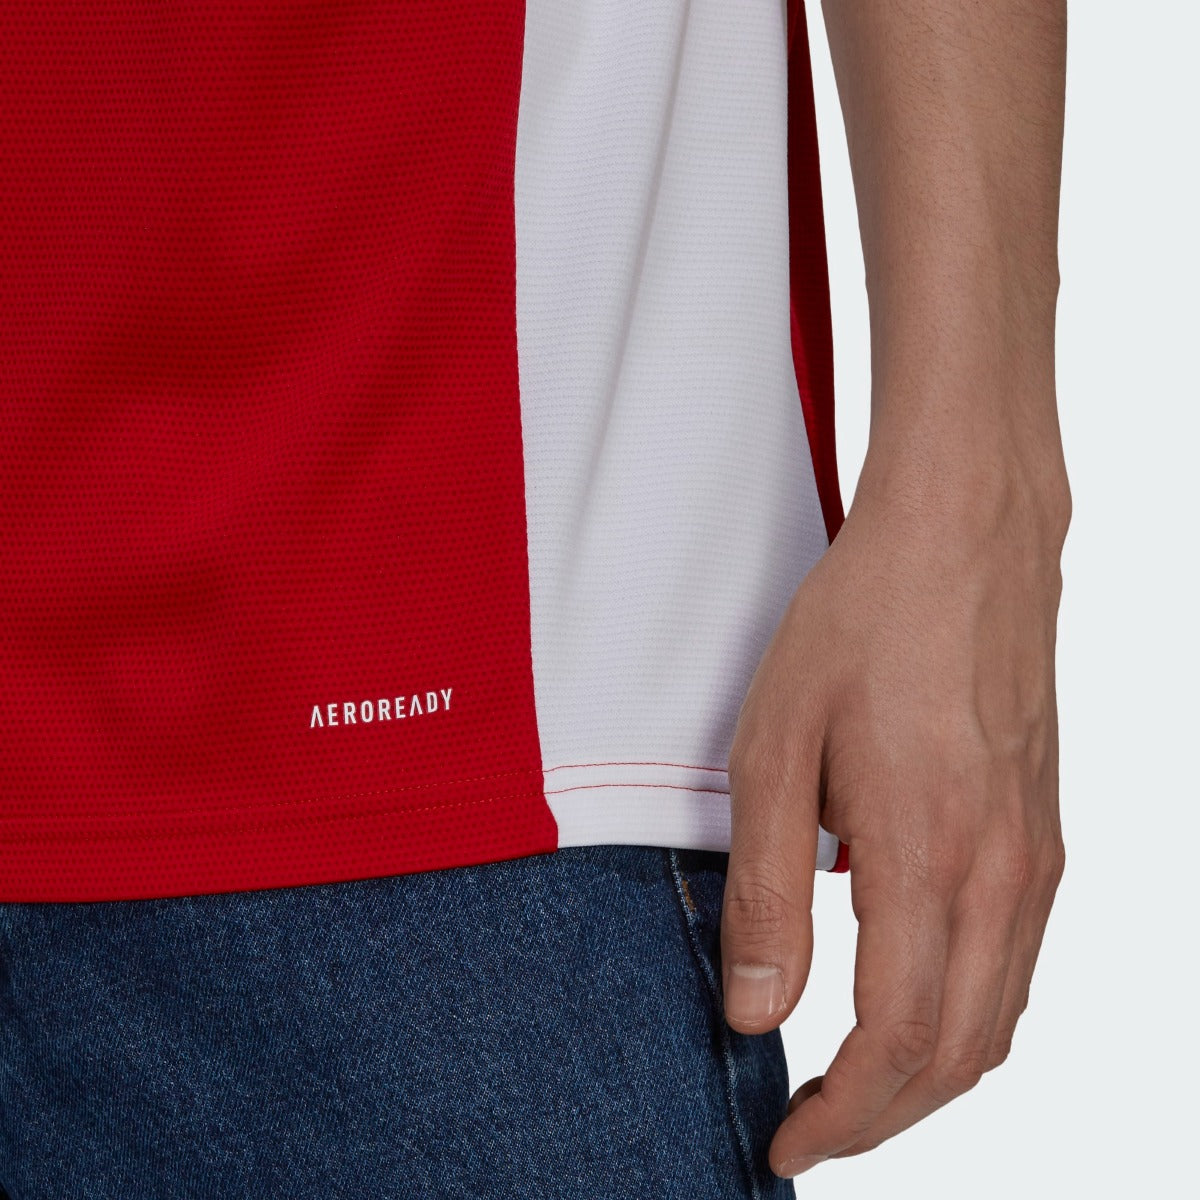 Adidas 2021-22 Arsenal Home Jersey - Red-Navy (Detail 3)